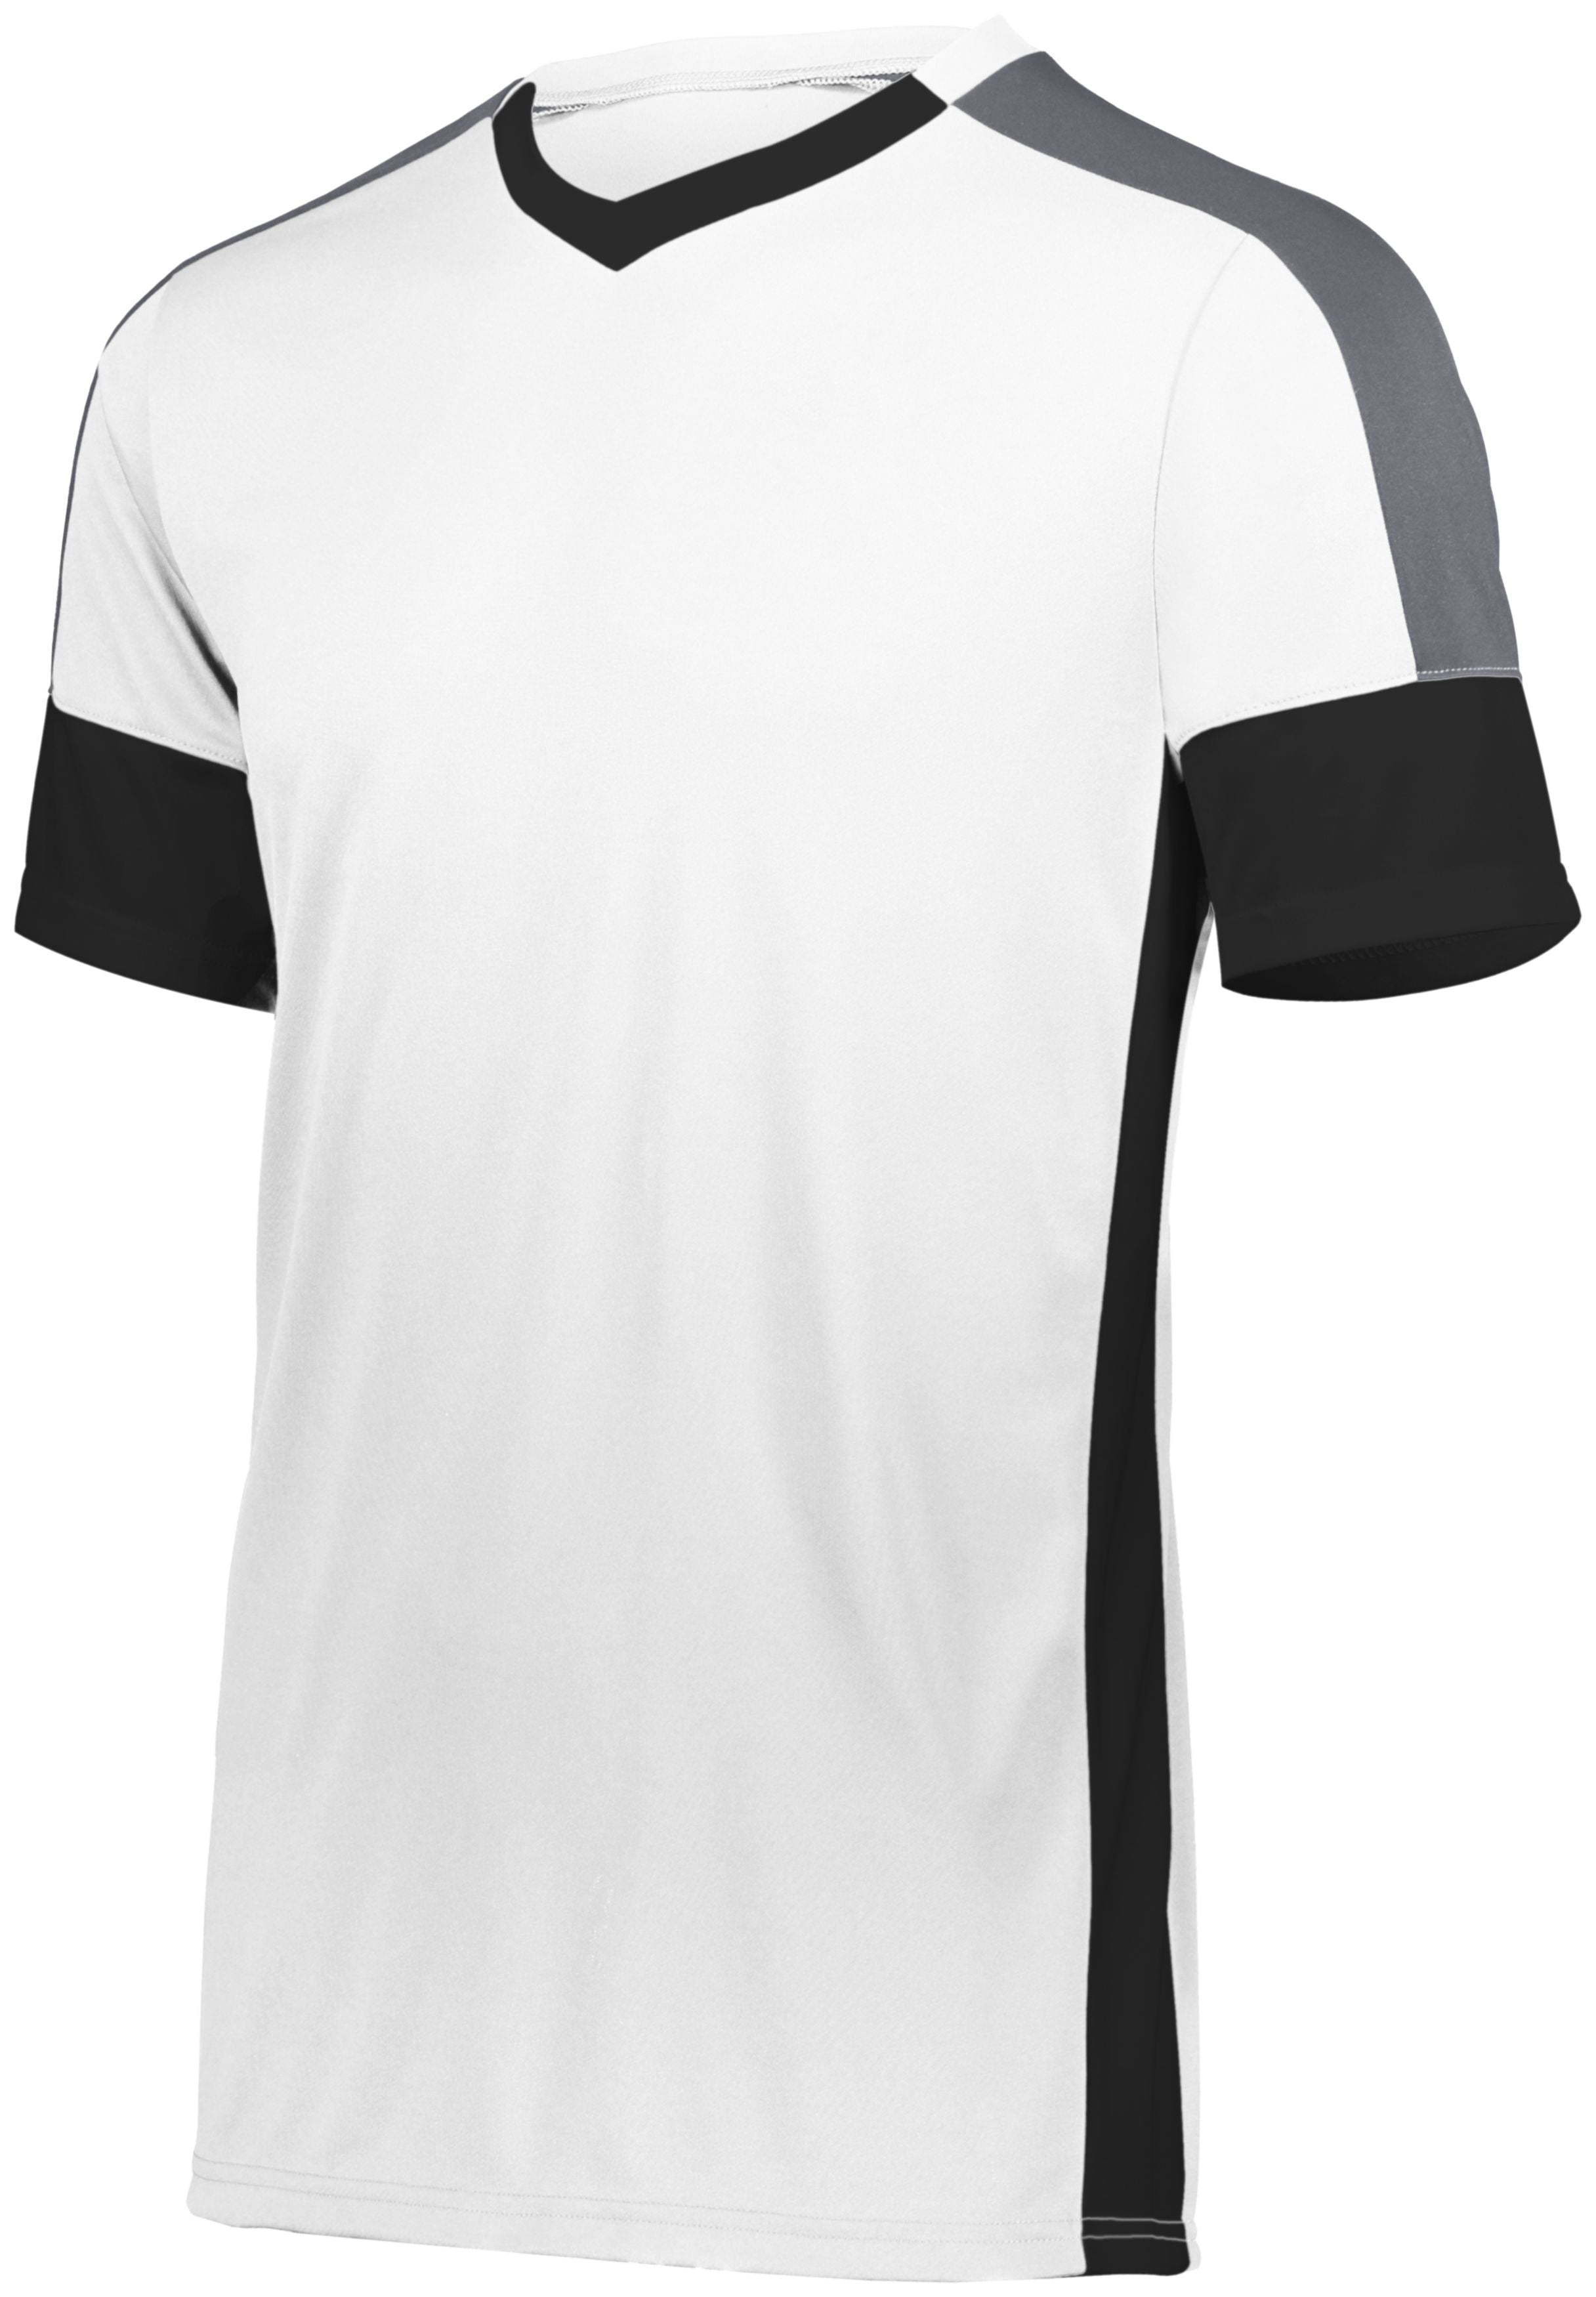 High 5 Youth Wembley Soccer Jersey in White/Black/Graphite  -Part of the Youth, Youth-Jersey, High5-Products, Soccer, Shirts, All-Sports-1 product lines at KanaleyCreations.com